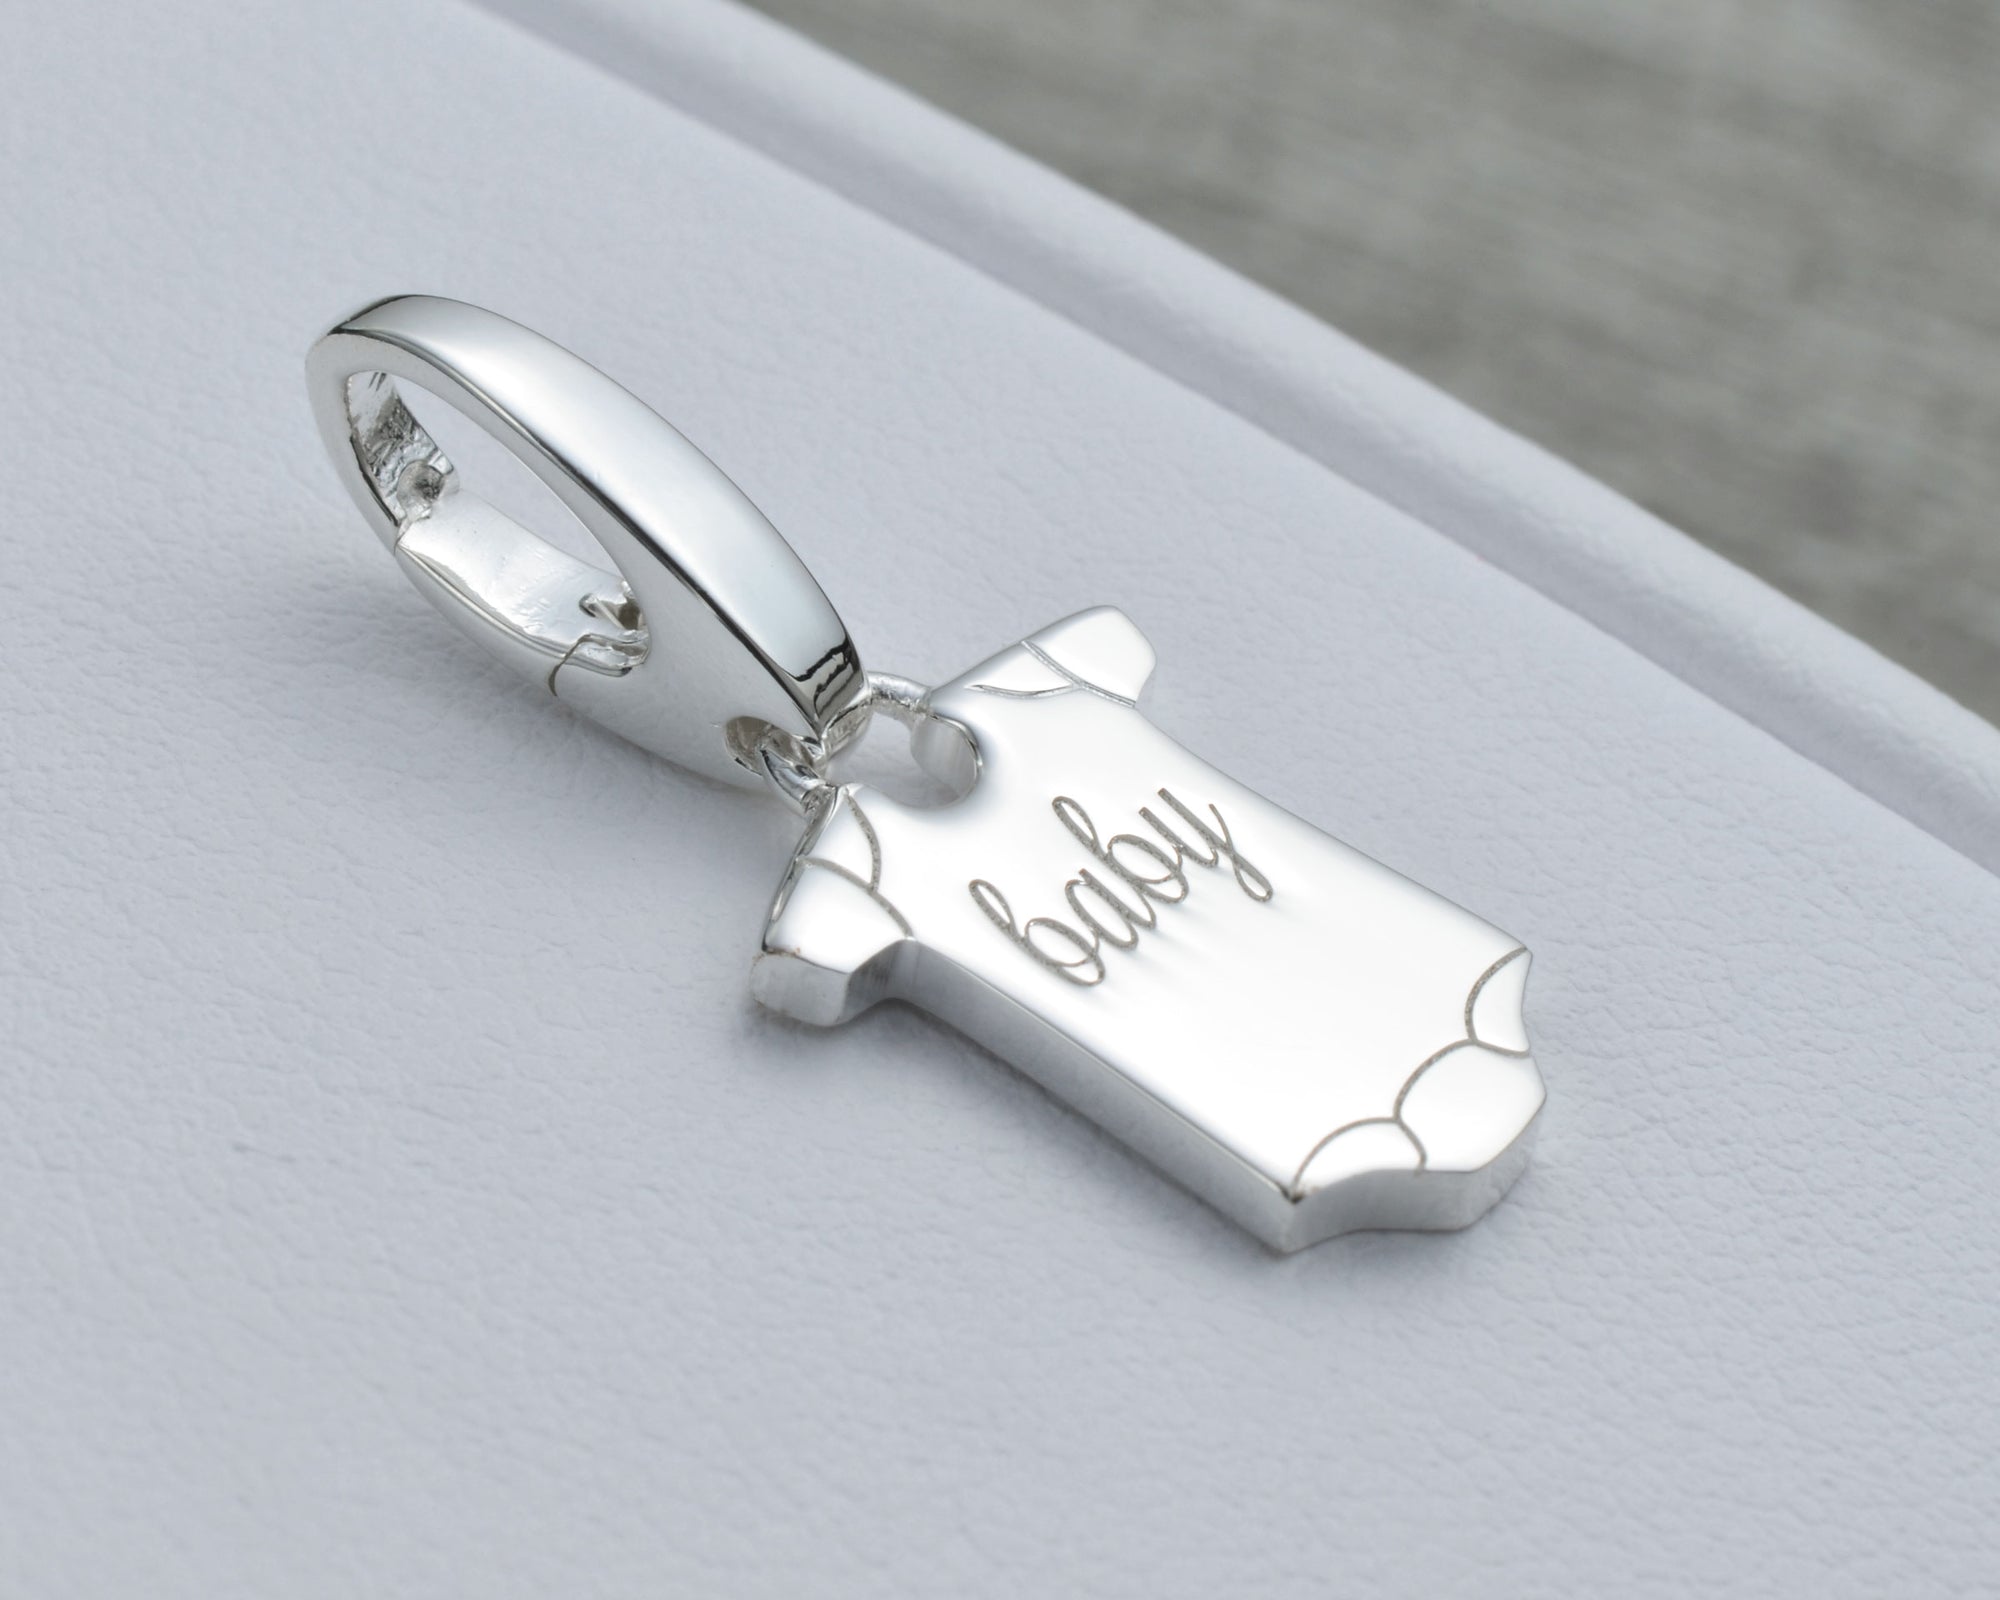 BABY CHARM IN STERLING SILVER